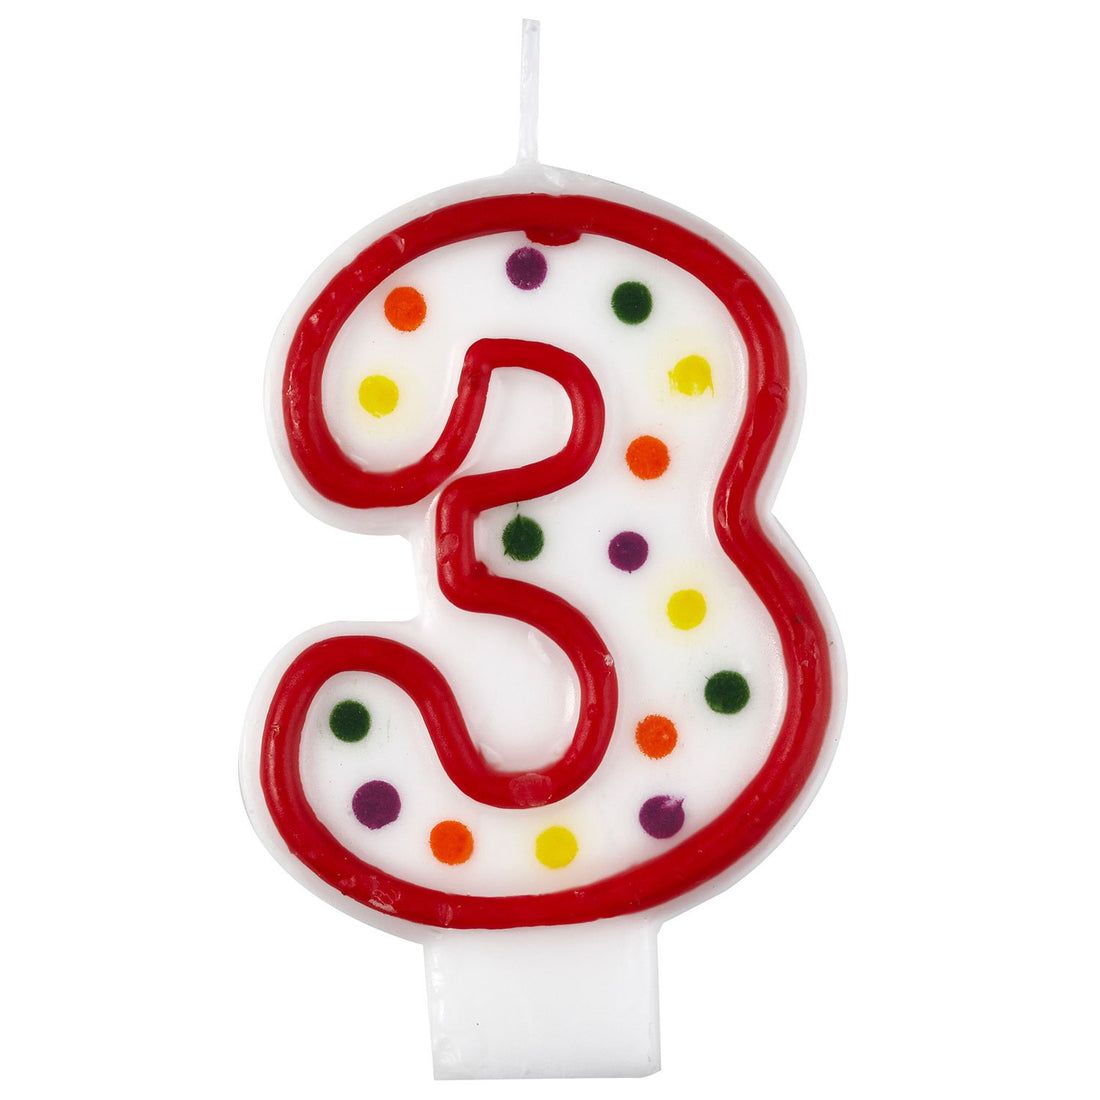 Number Age Polka Dot Birthday Candles 7.5cm